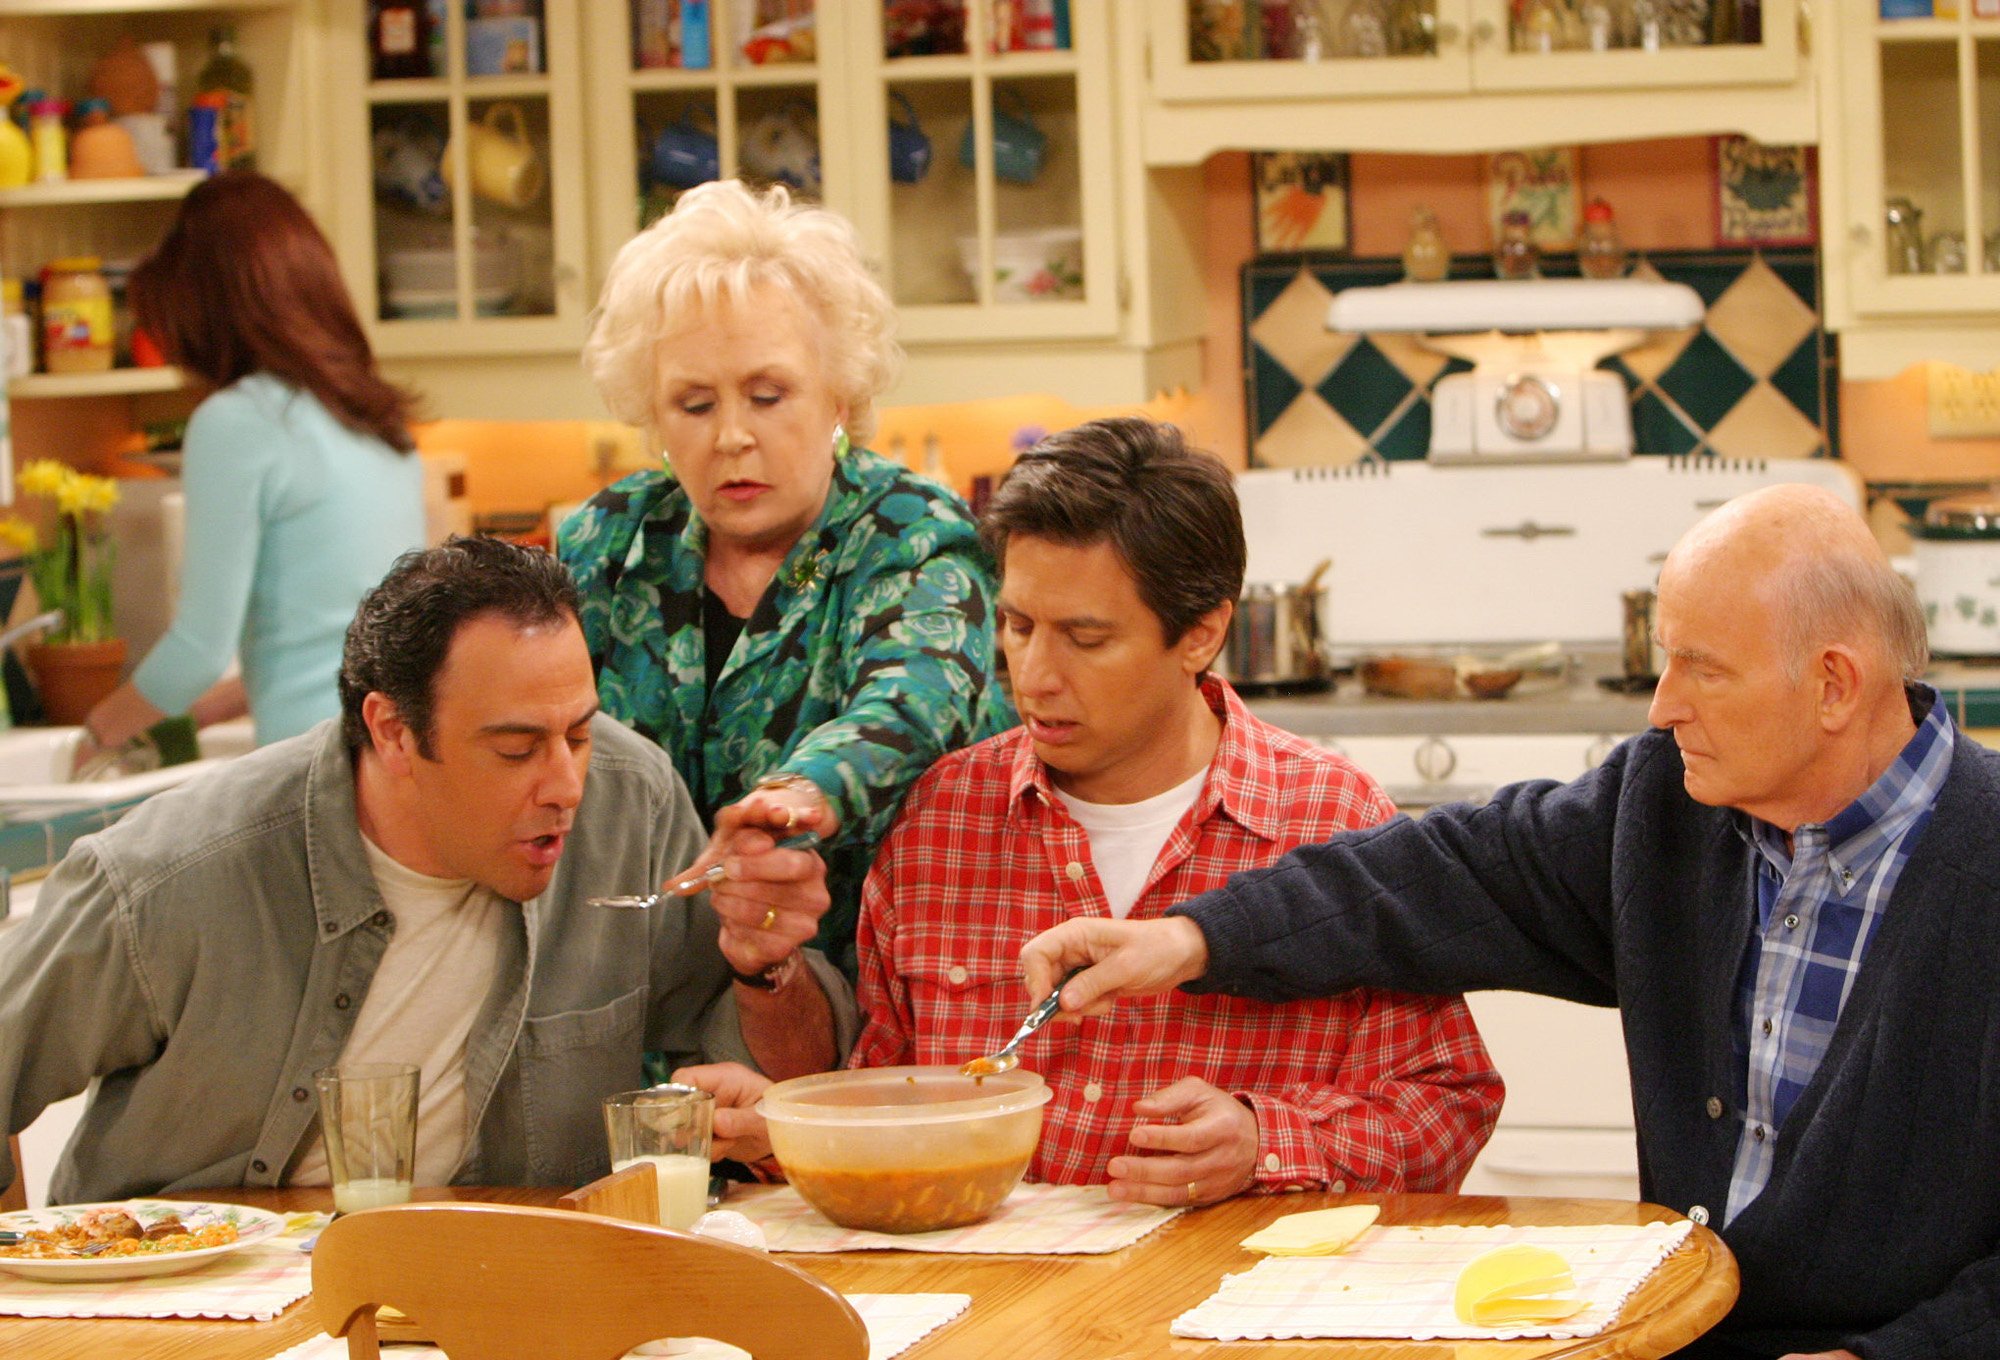 ‘Everybody Loves Raymond’: Ray Romano Shared How Peter Boyle ‘Broke the Ice’ the First Day on the Set